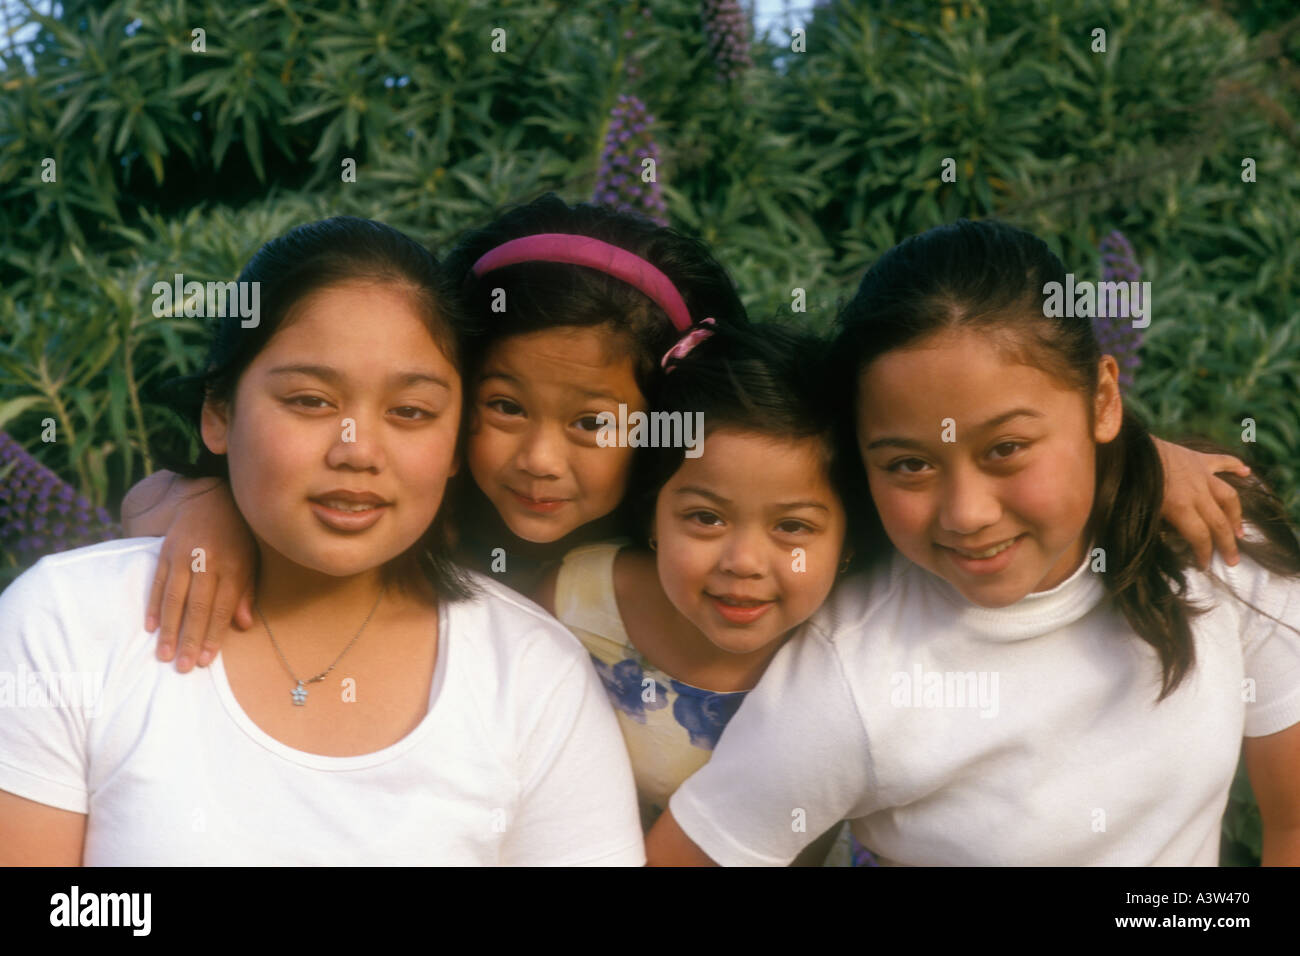 Portrait of 4 Asian American sisters in front of foliage Stock Photo